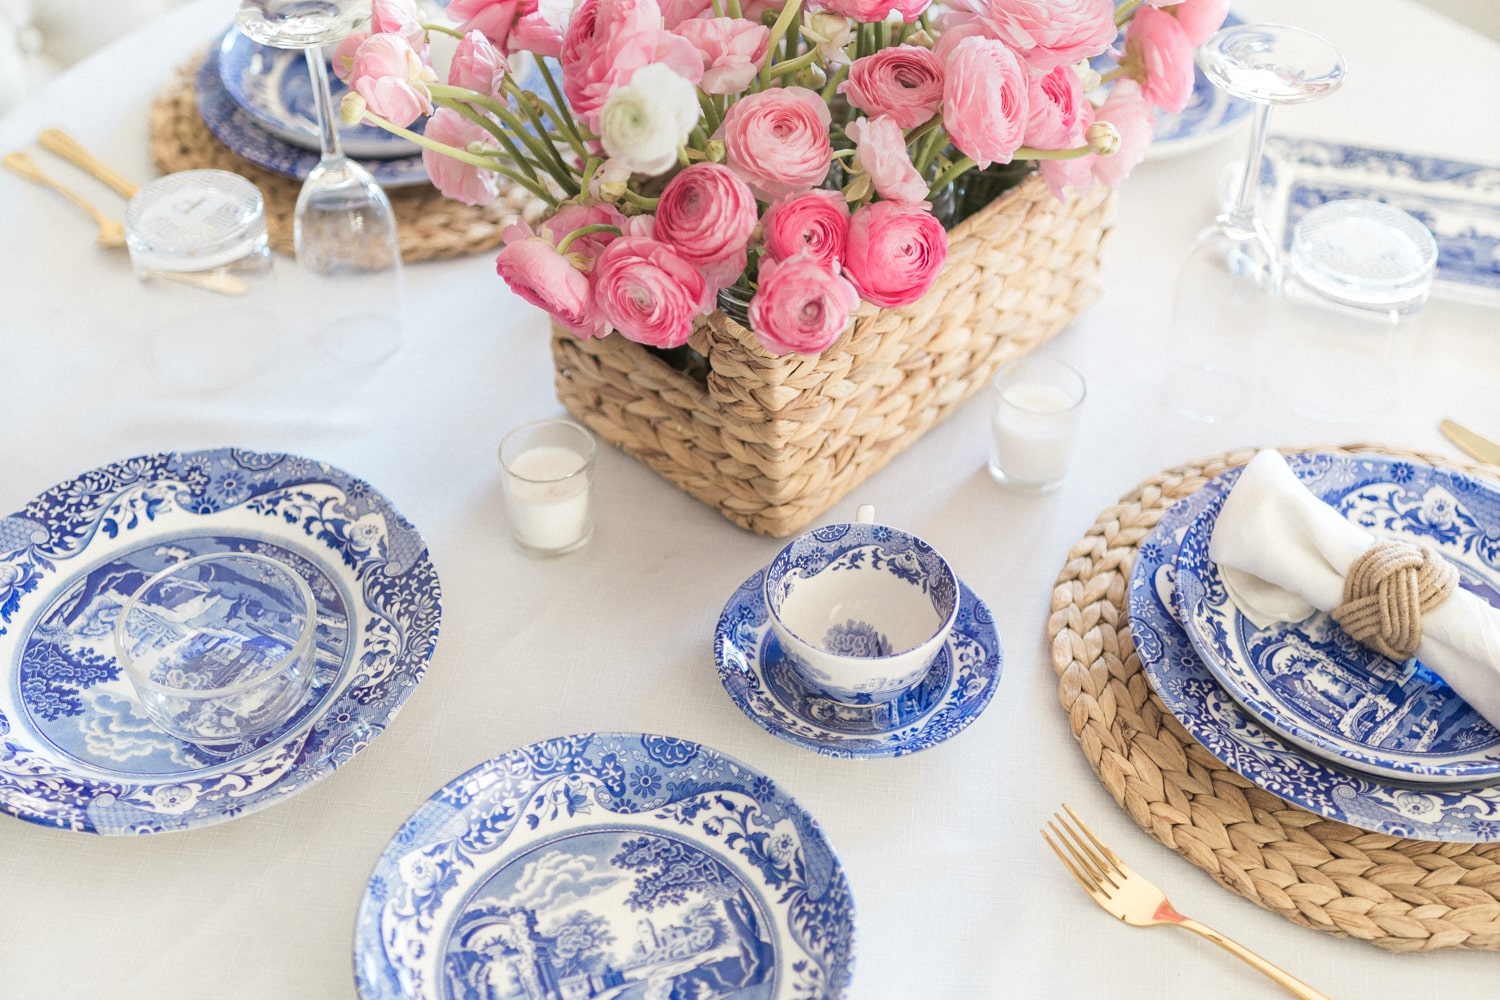 Romantic table setting for 2 designed by blogger Stephanie Ziajka on Diary of a Debutante